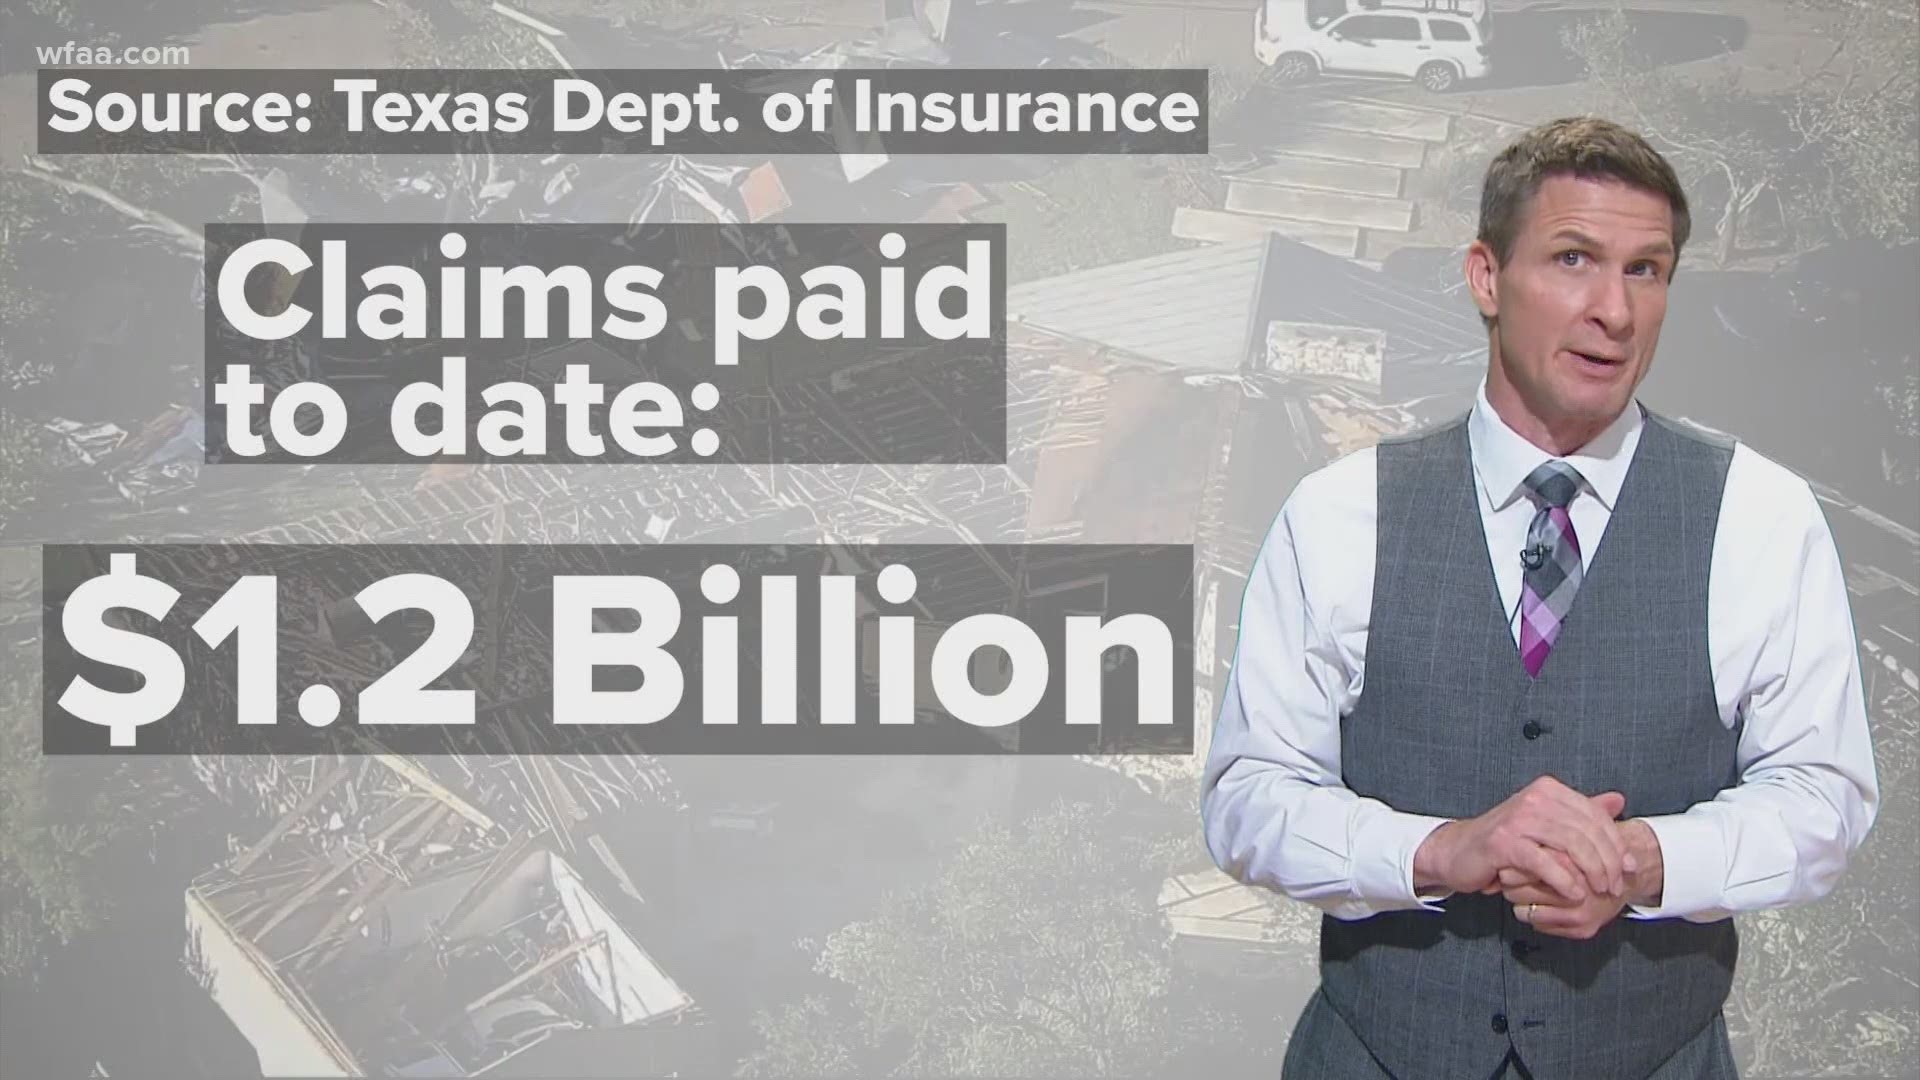 It's been a year since the Dallas tornado outbreak. Since then, many claims have been paid, many insurance rates have changed and a lot of profit has been made.